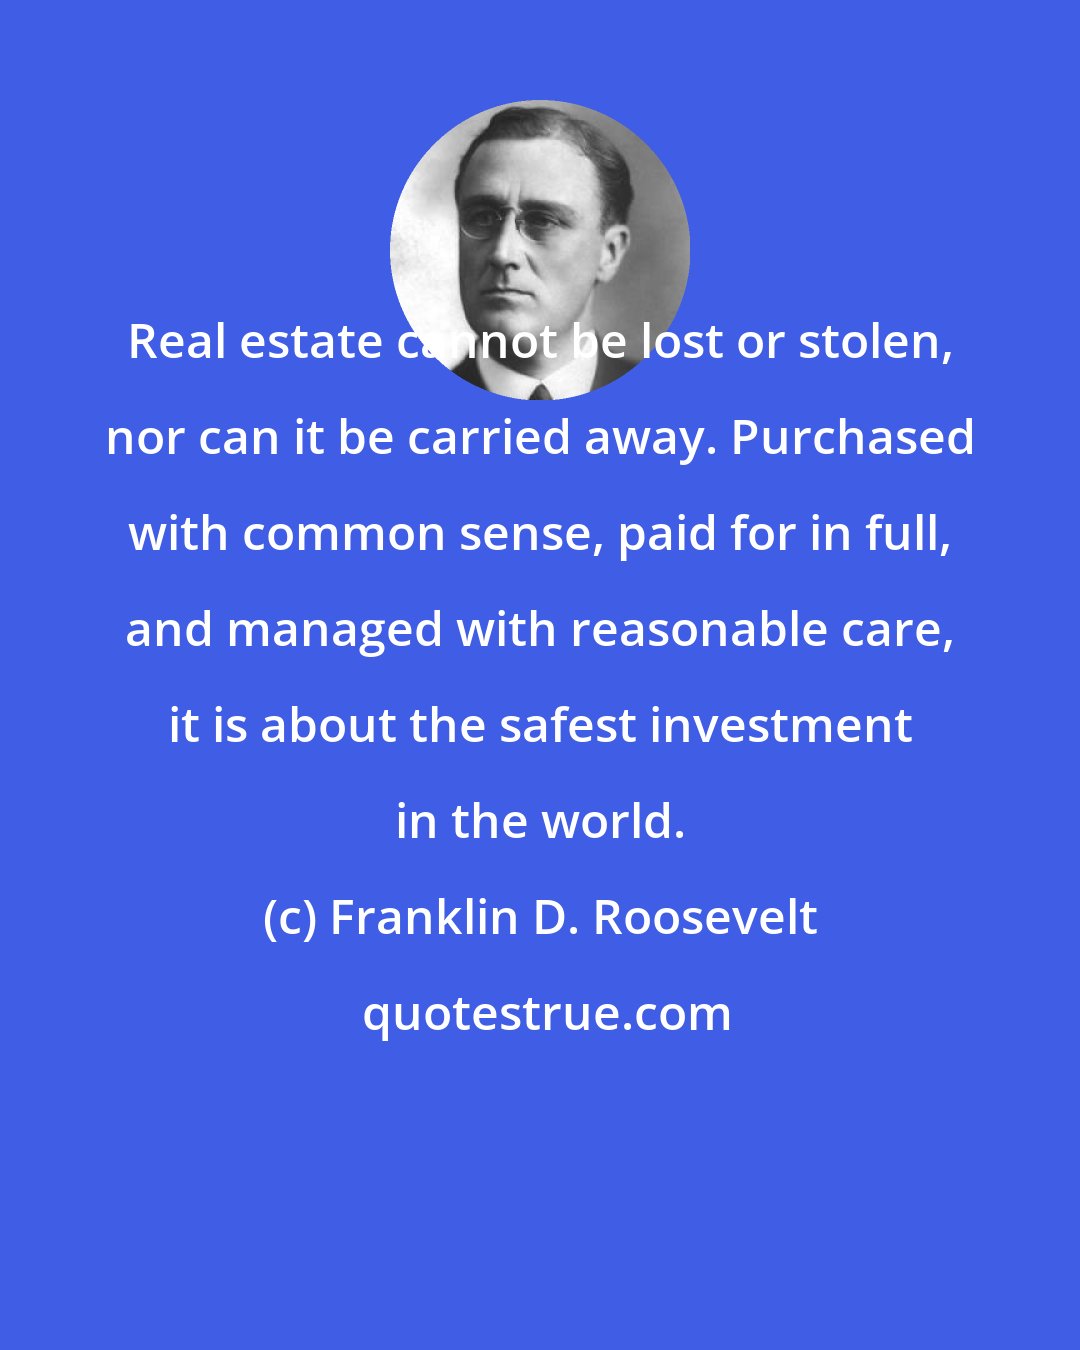 Franklin D. Roosevelt: Real estate cannot be lost or stolen, nor can it be carried away. Purchased with common sense, paid for in full, and managed with reasonable care, it is about the safest investment in the world.